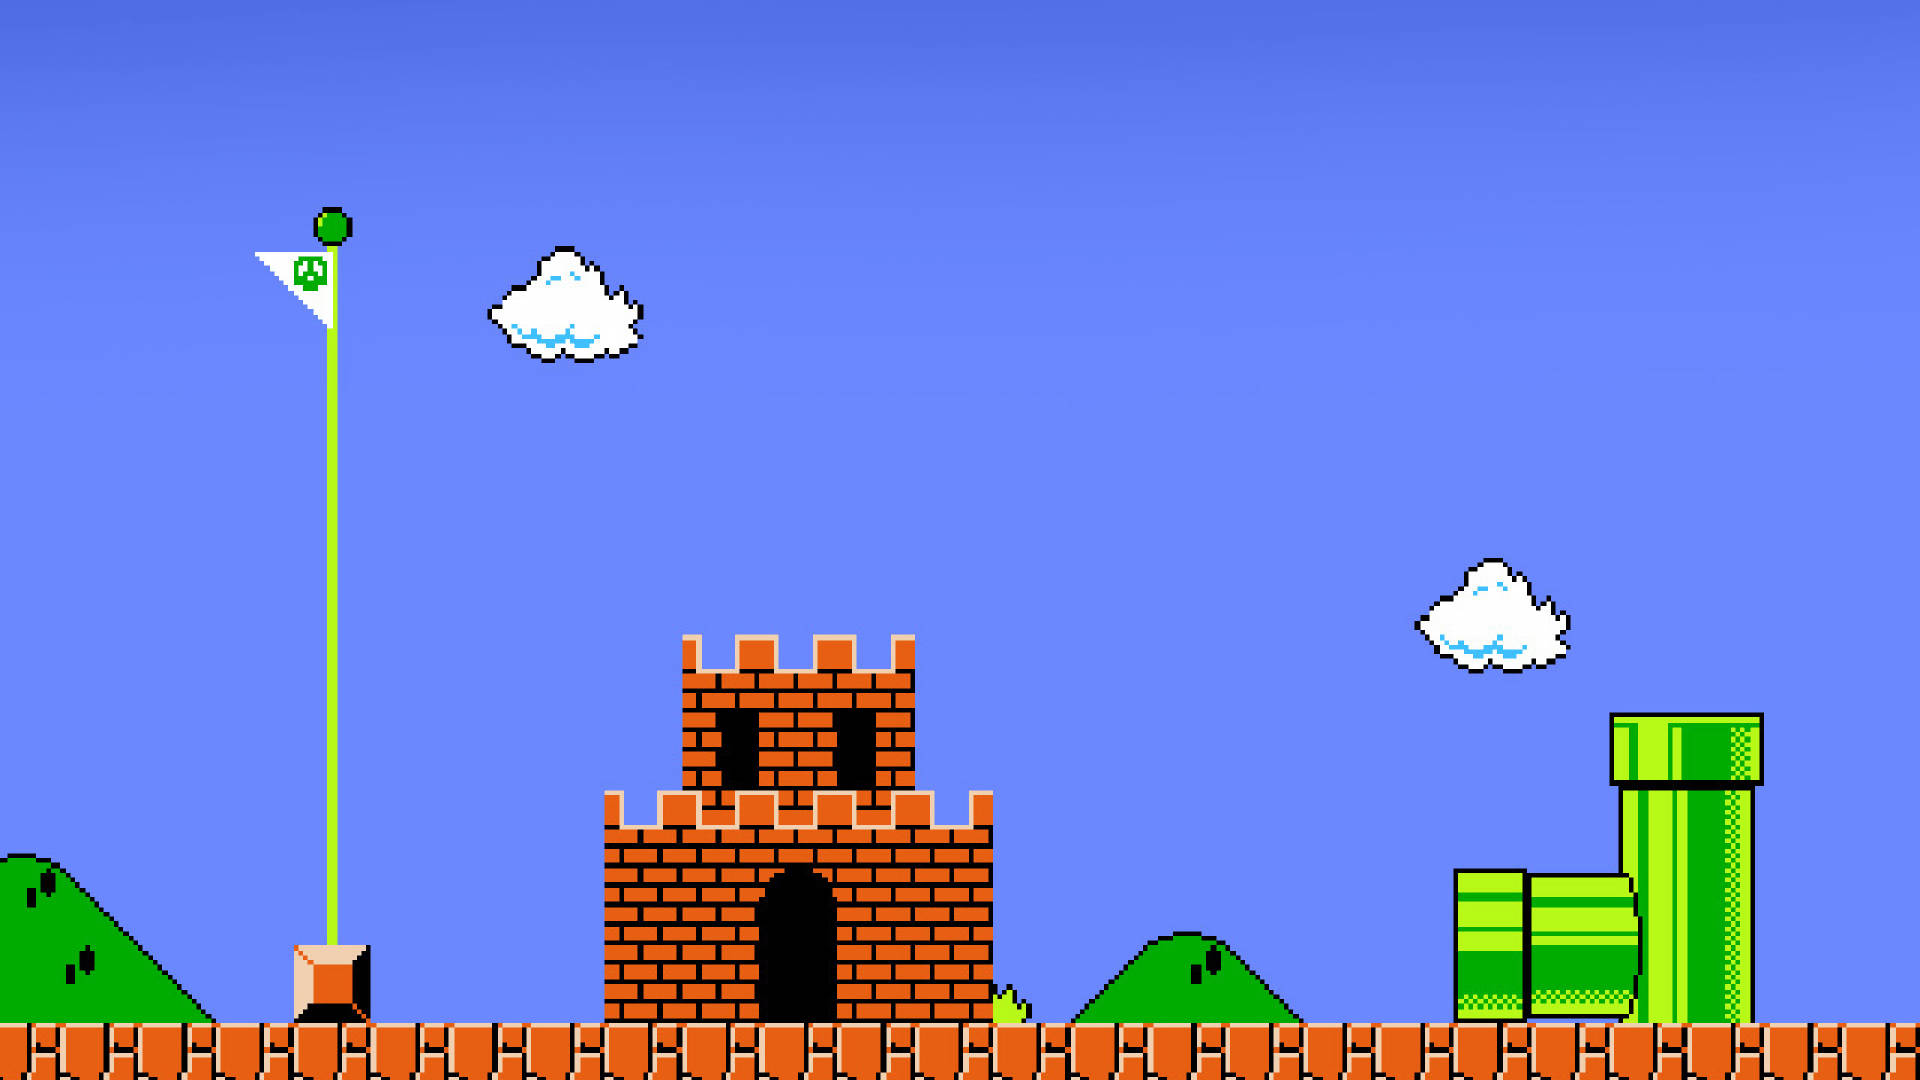 A Nintendo Mario Game With A Castle And A Castle Background